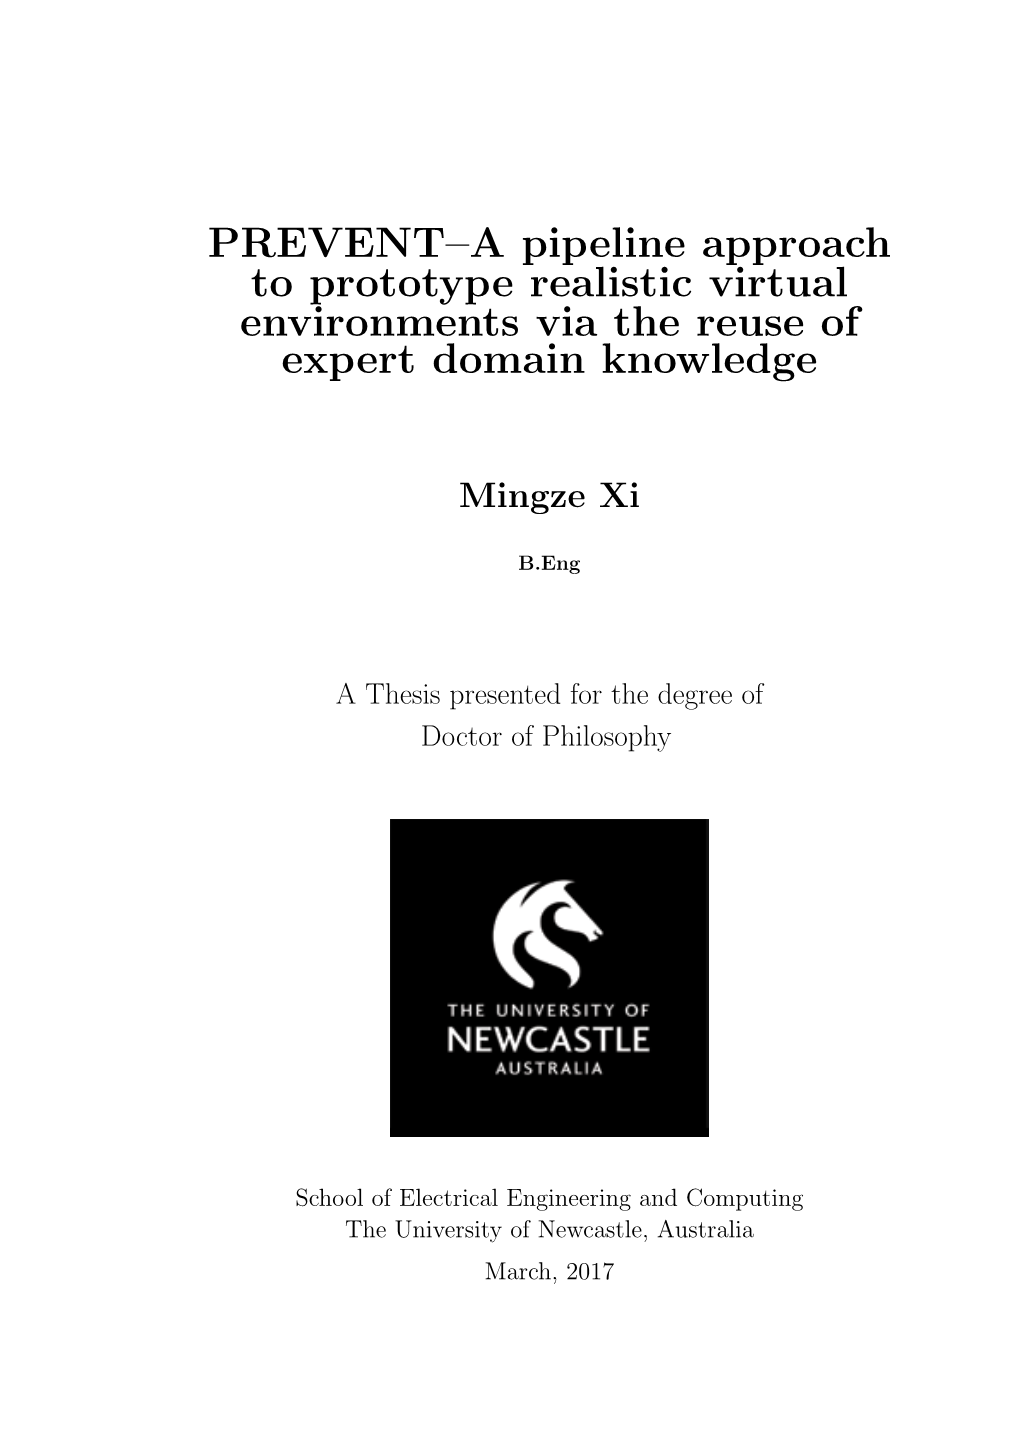 PREVENT–A Pipeline Approach to Prototype Realistic Virtual Environments Via the Reuse of Expert Domain Knowledge